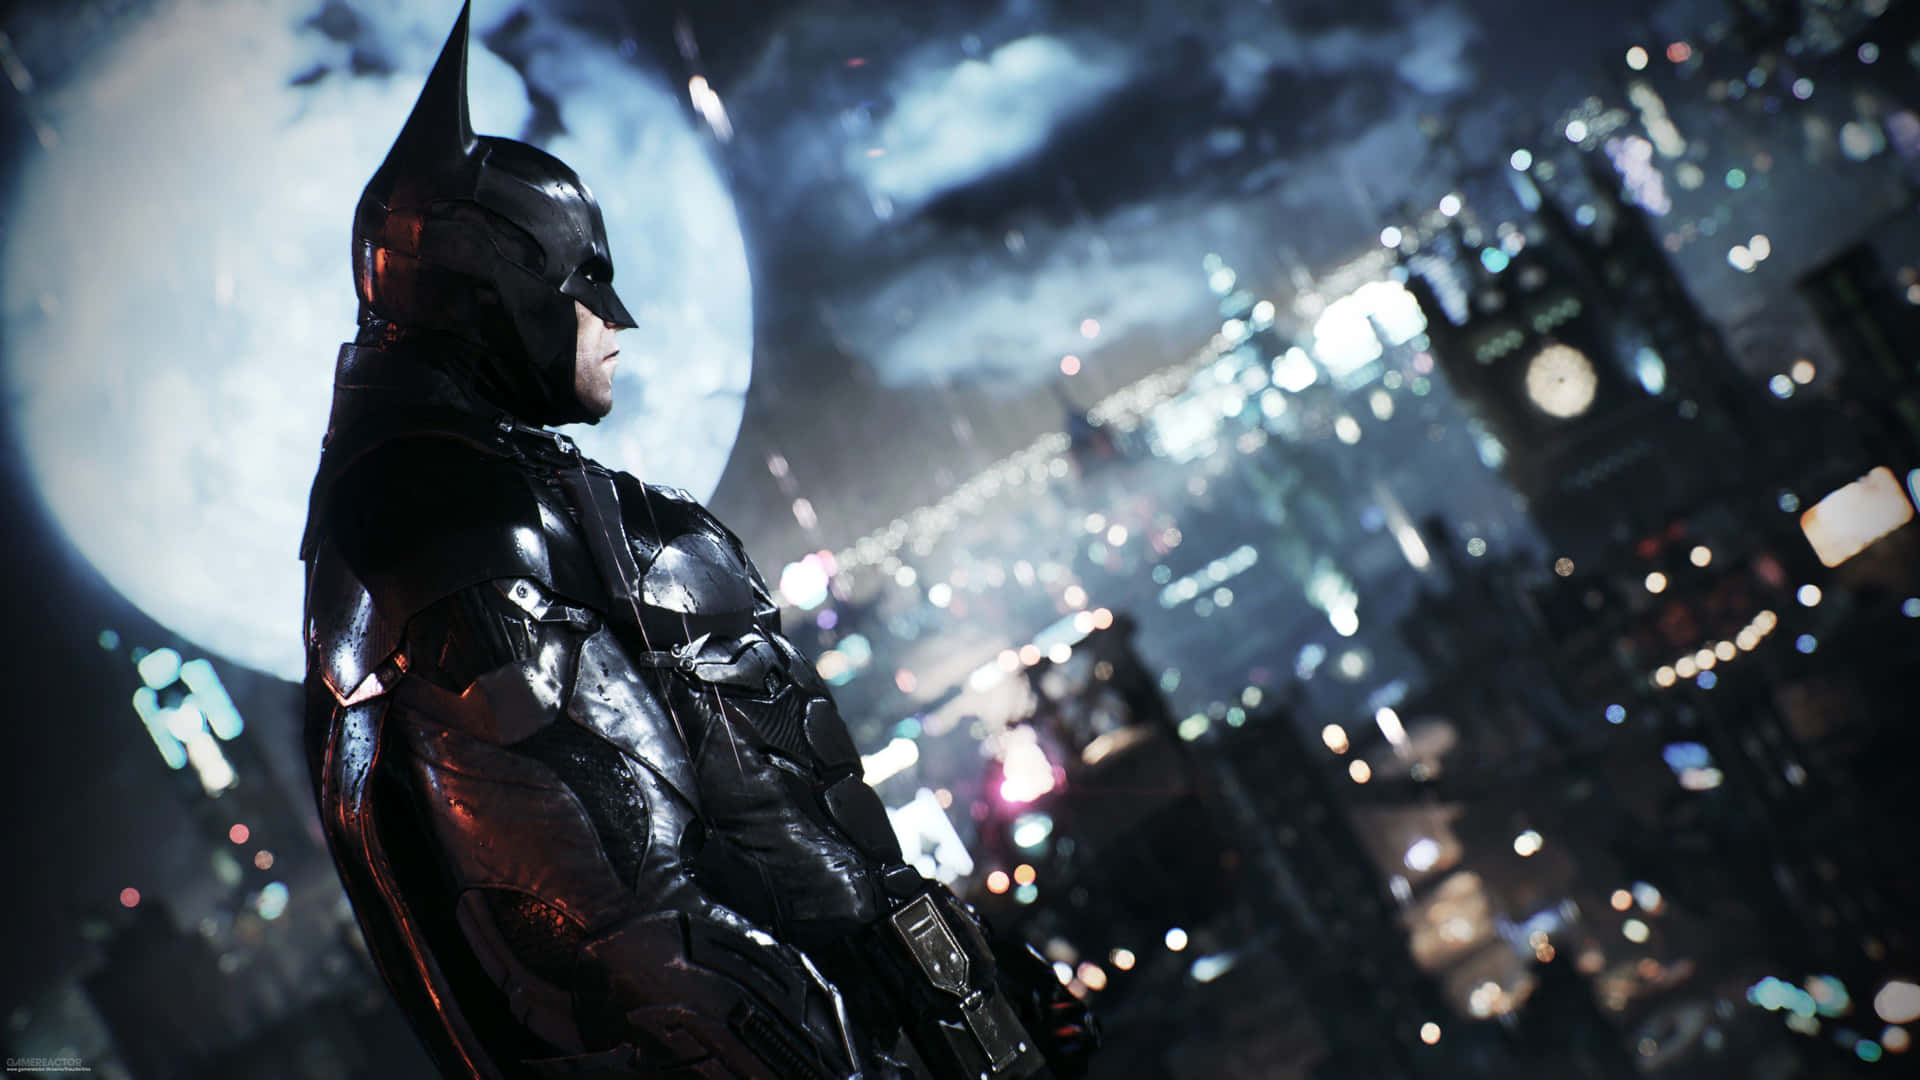 Uncover the secrets of Gotham City in Arkham Knight Wallpaper